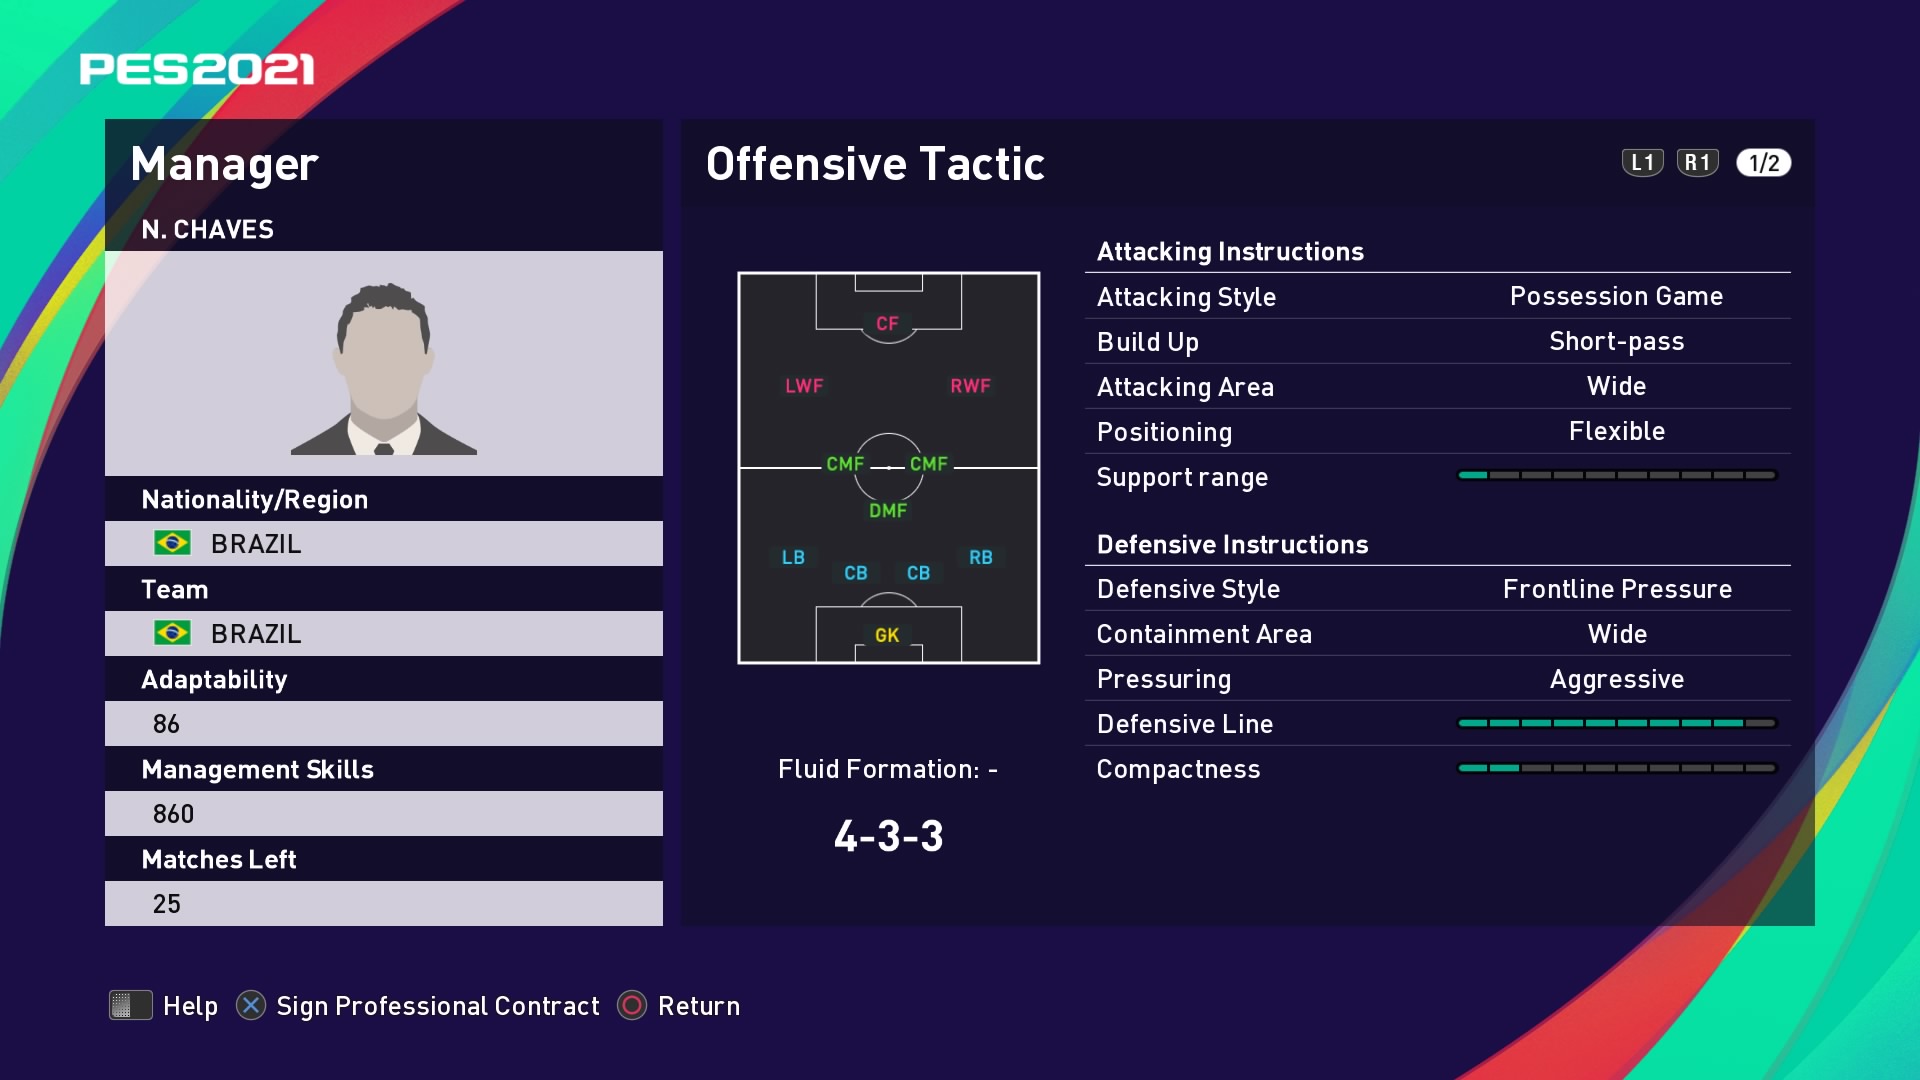 N. Chaves (Tite) Offensive Tactic in PES 2021 myClub